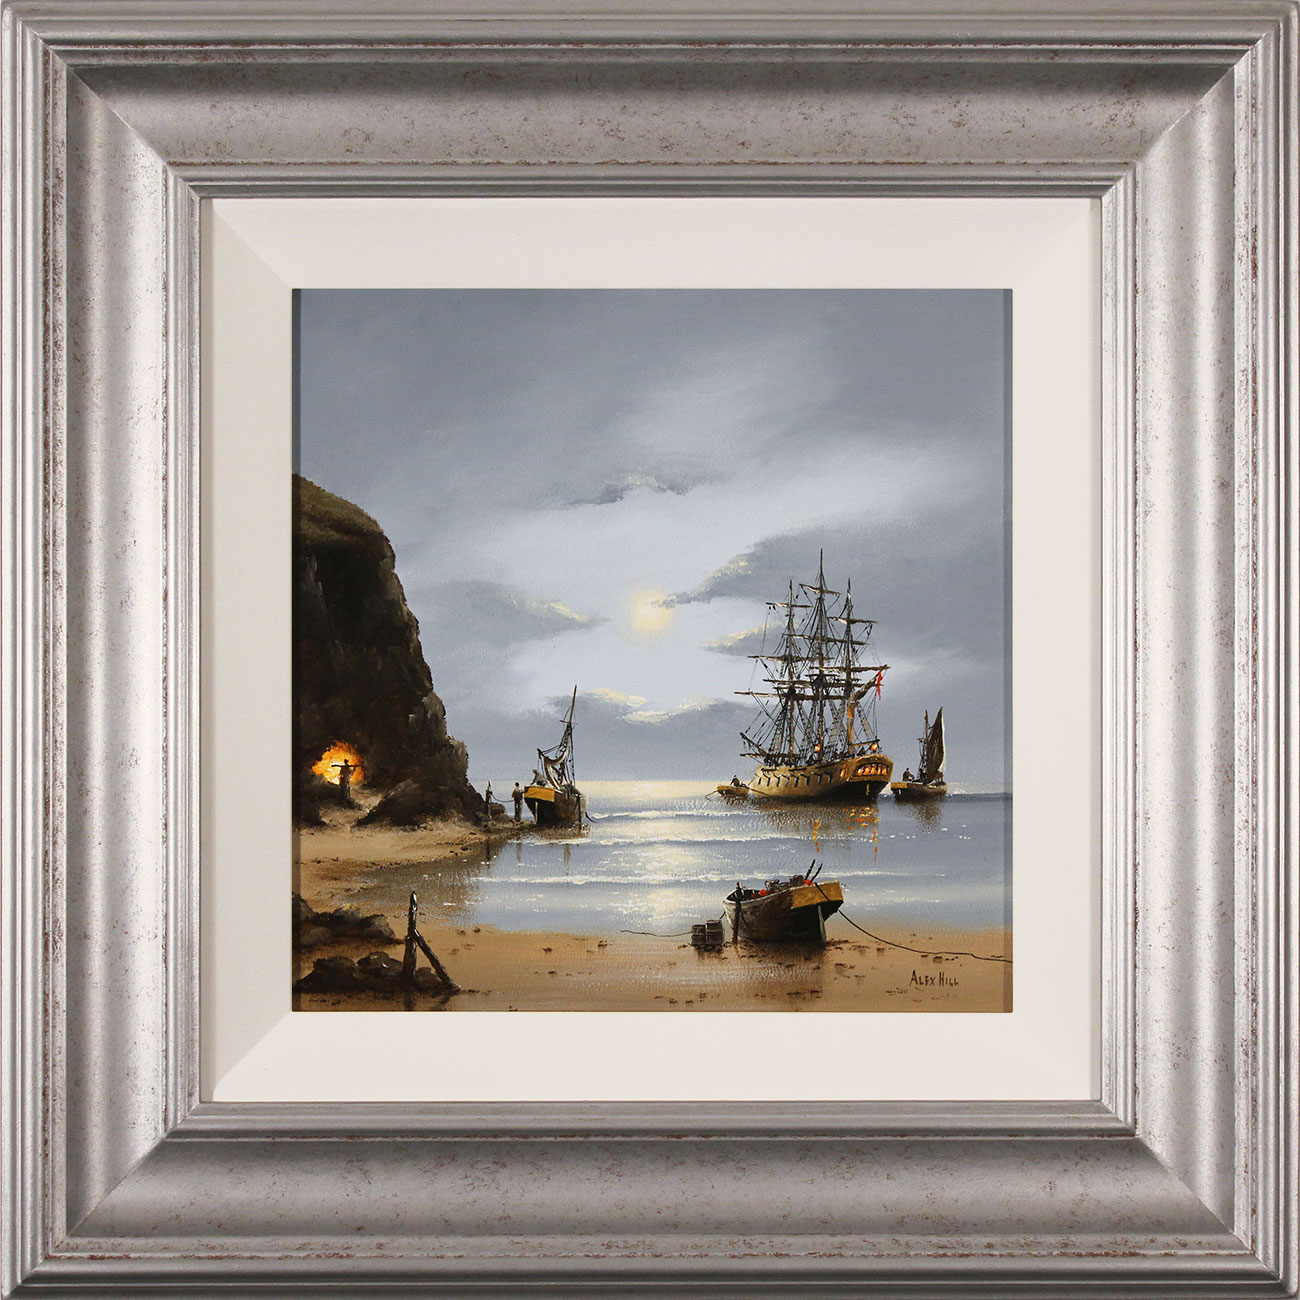 Alex Hill, Original oil painting on panel, Smuggler's Shores. Click to enlarge